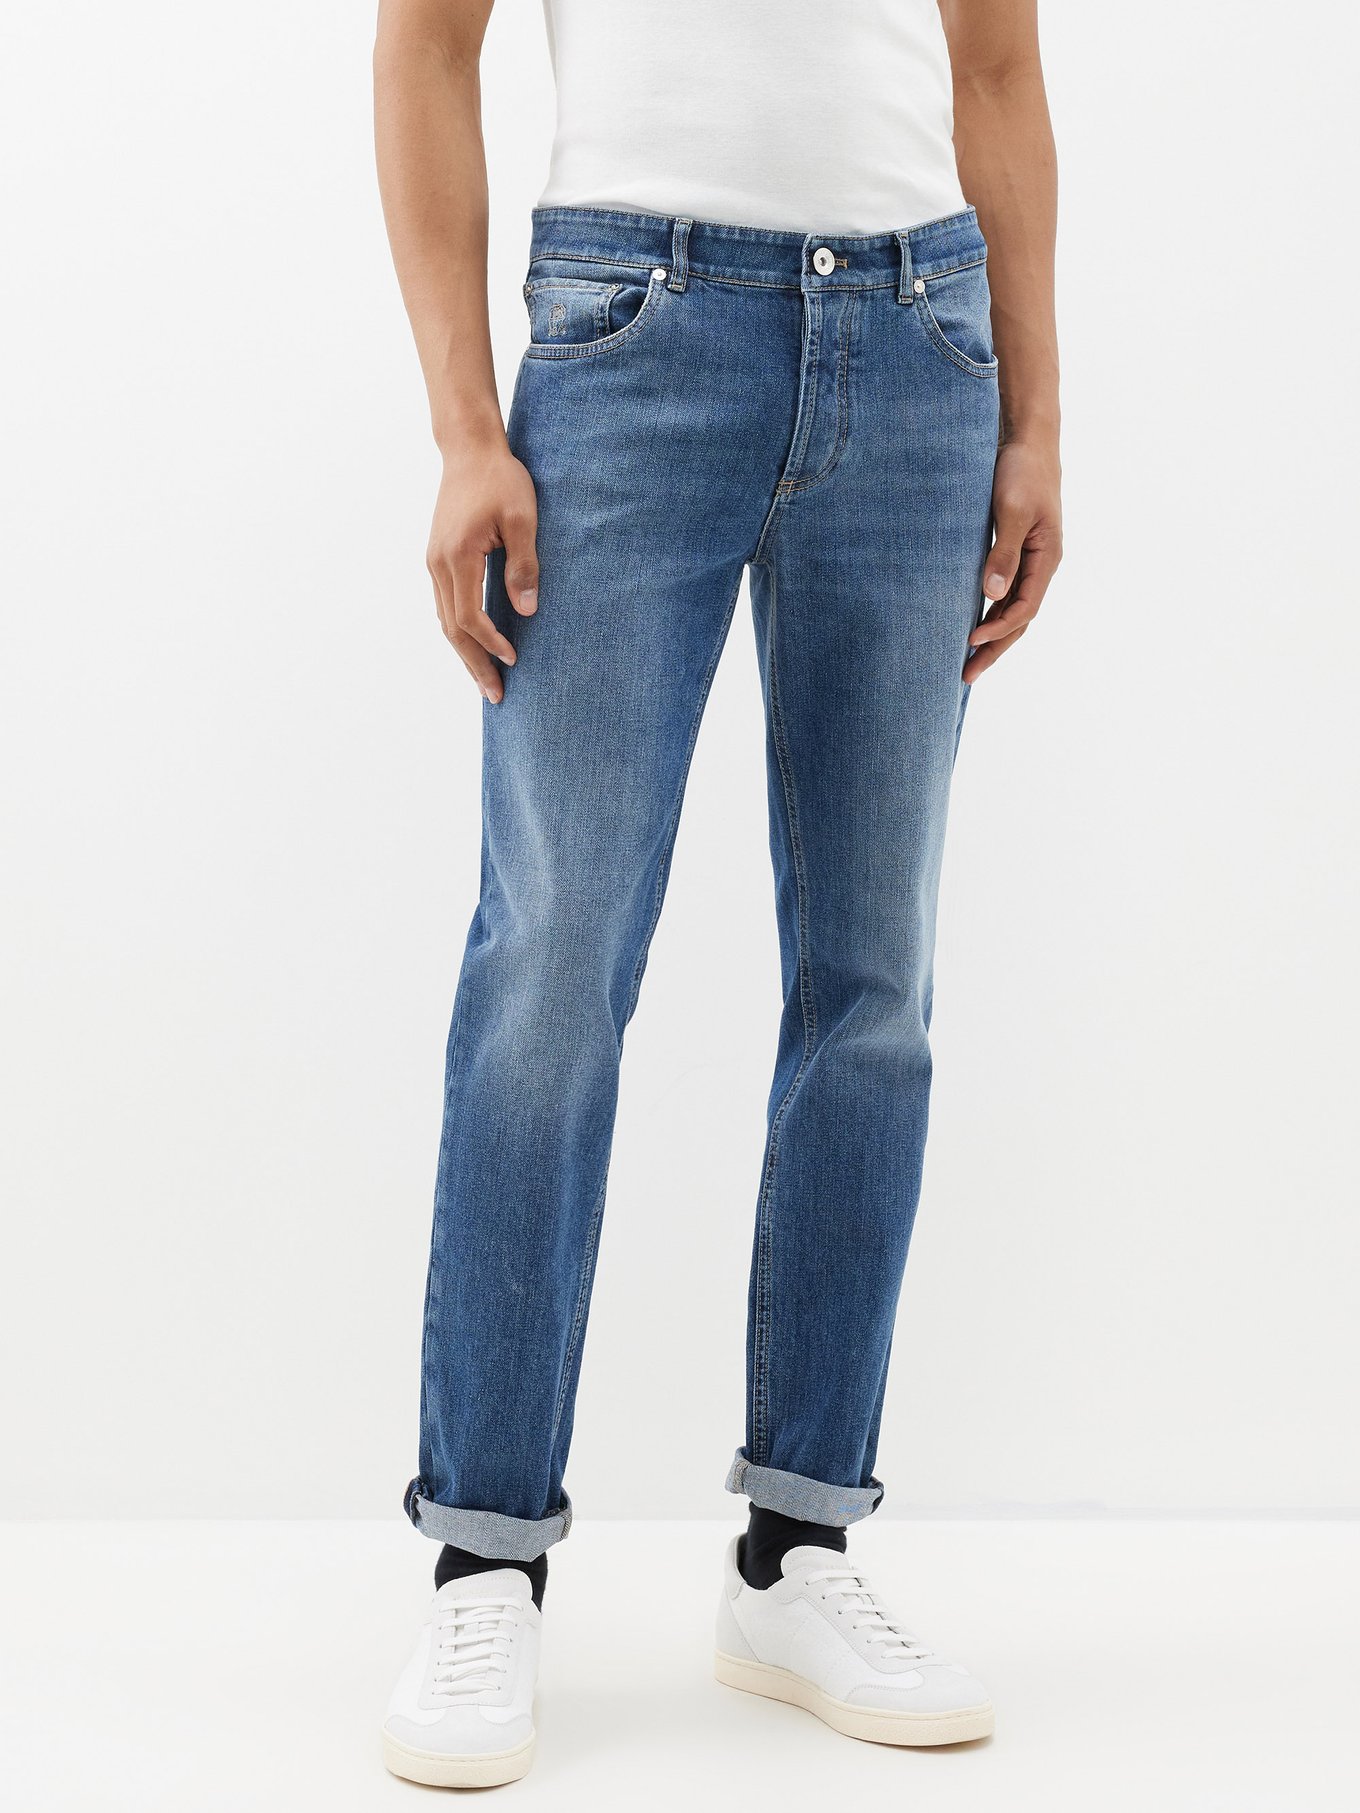 Gucci Tapered Washed Jeans, Size 36, Blue, Ready-to-wear